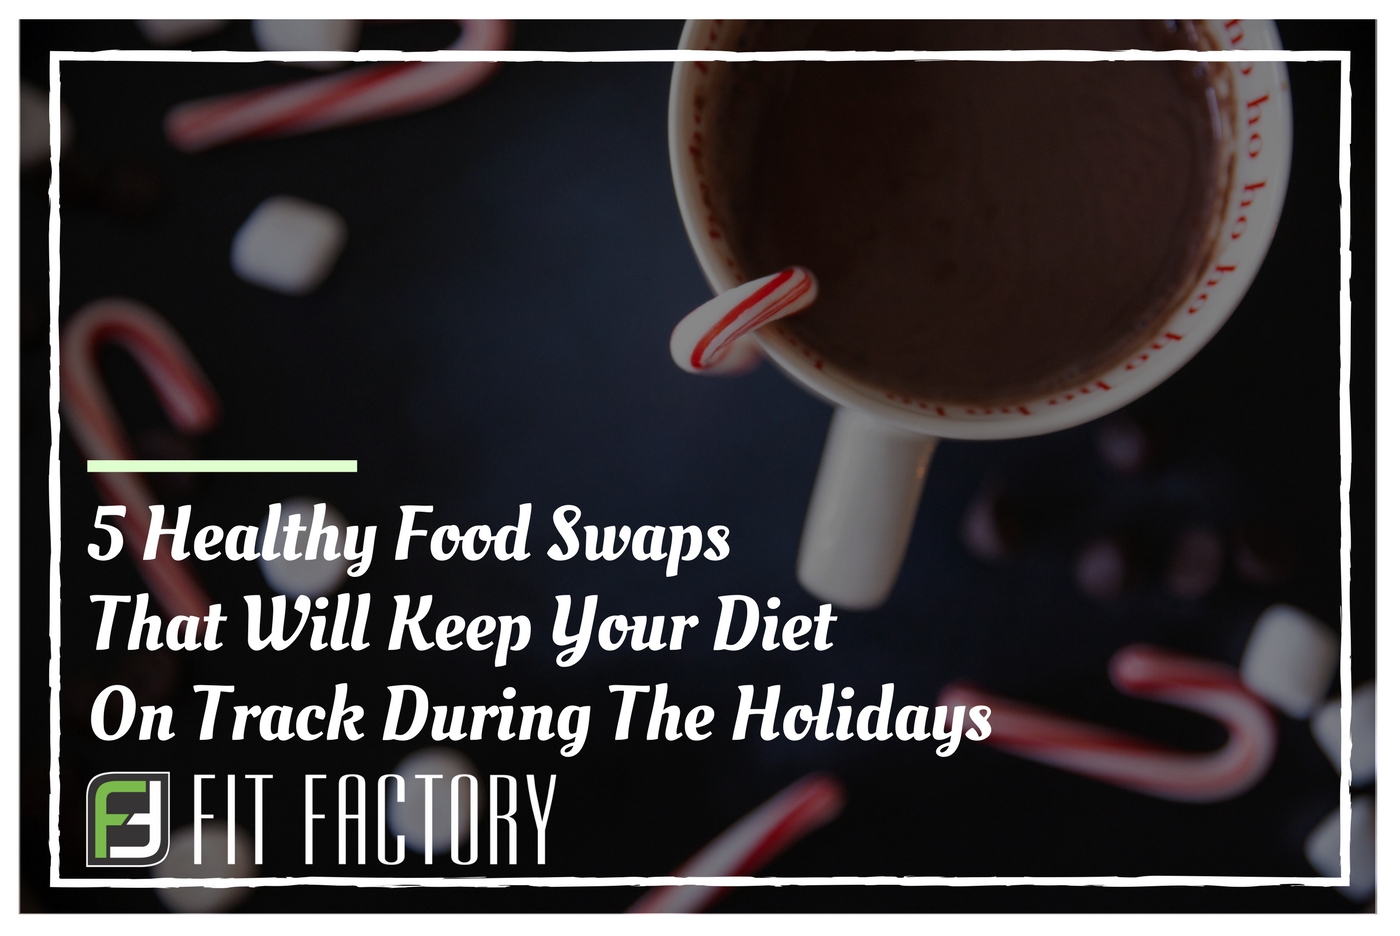 5 Healthy Food Swaps That Will Keep Your Diet on Track During the Holidays